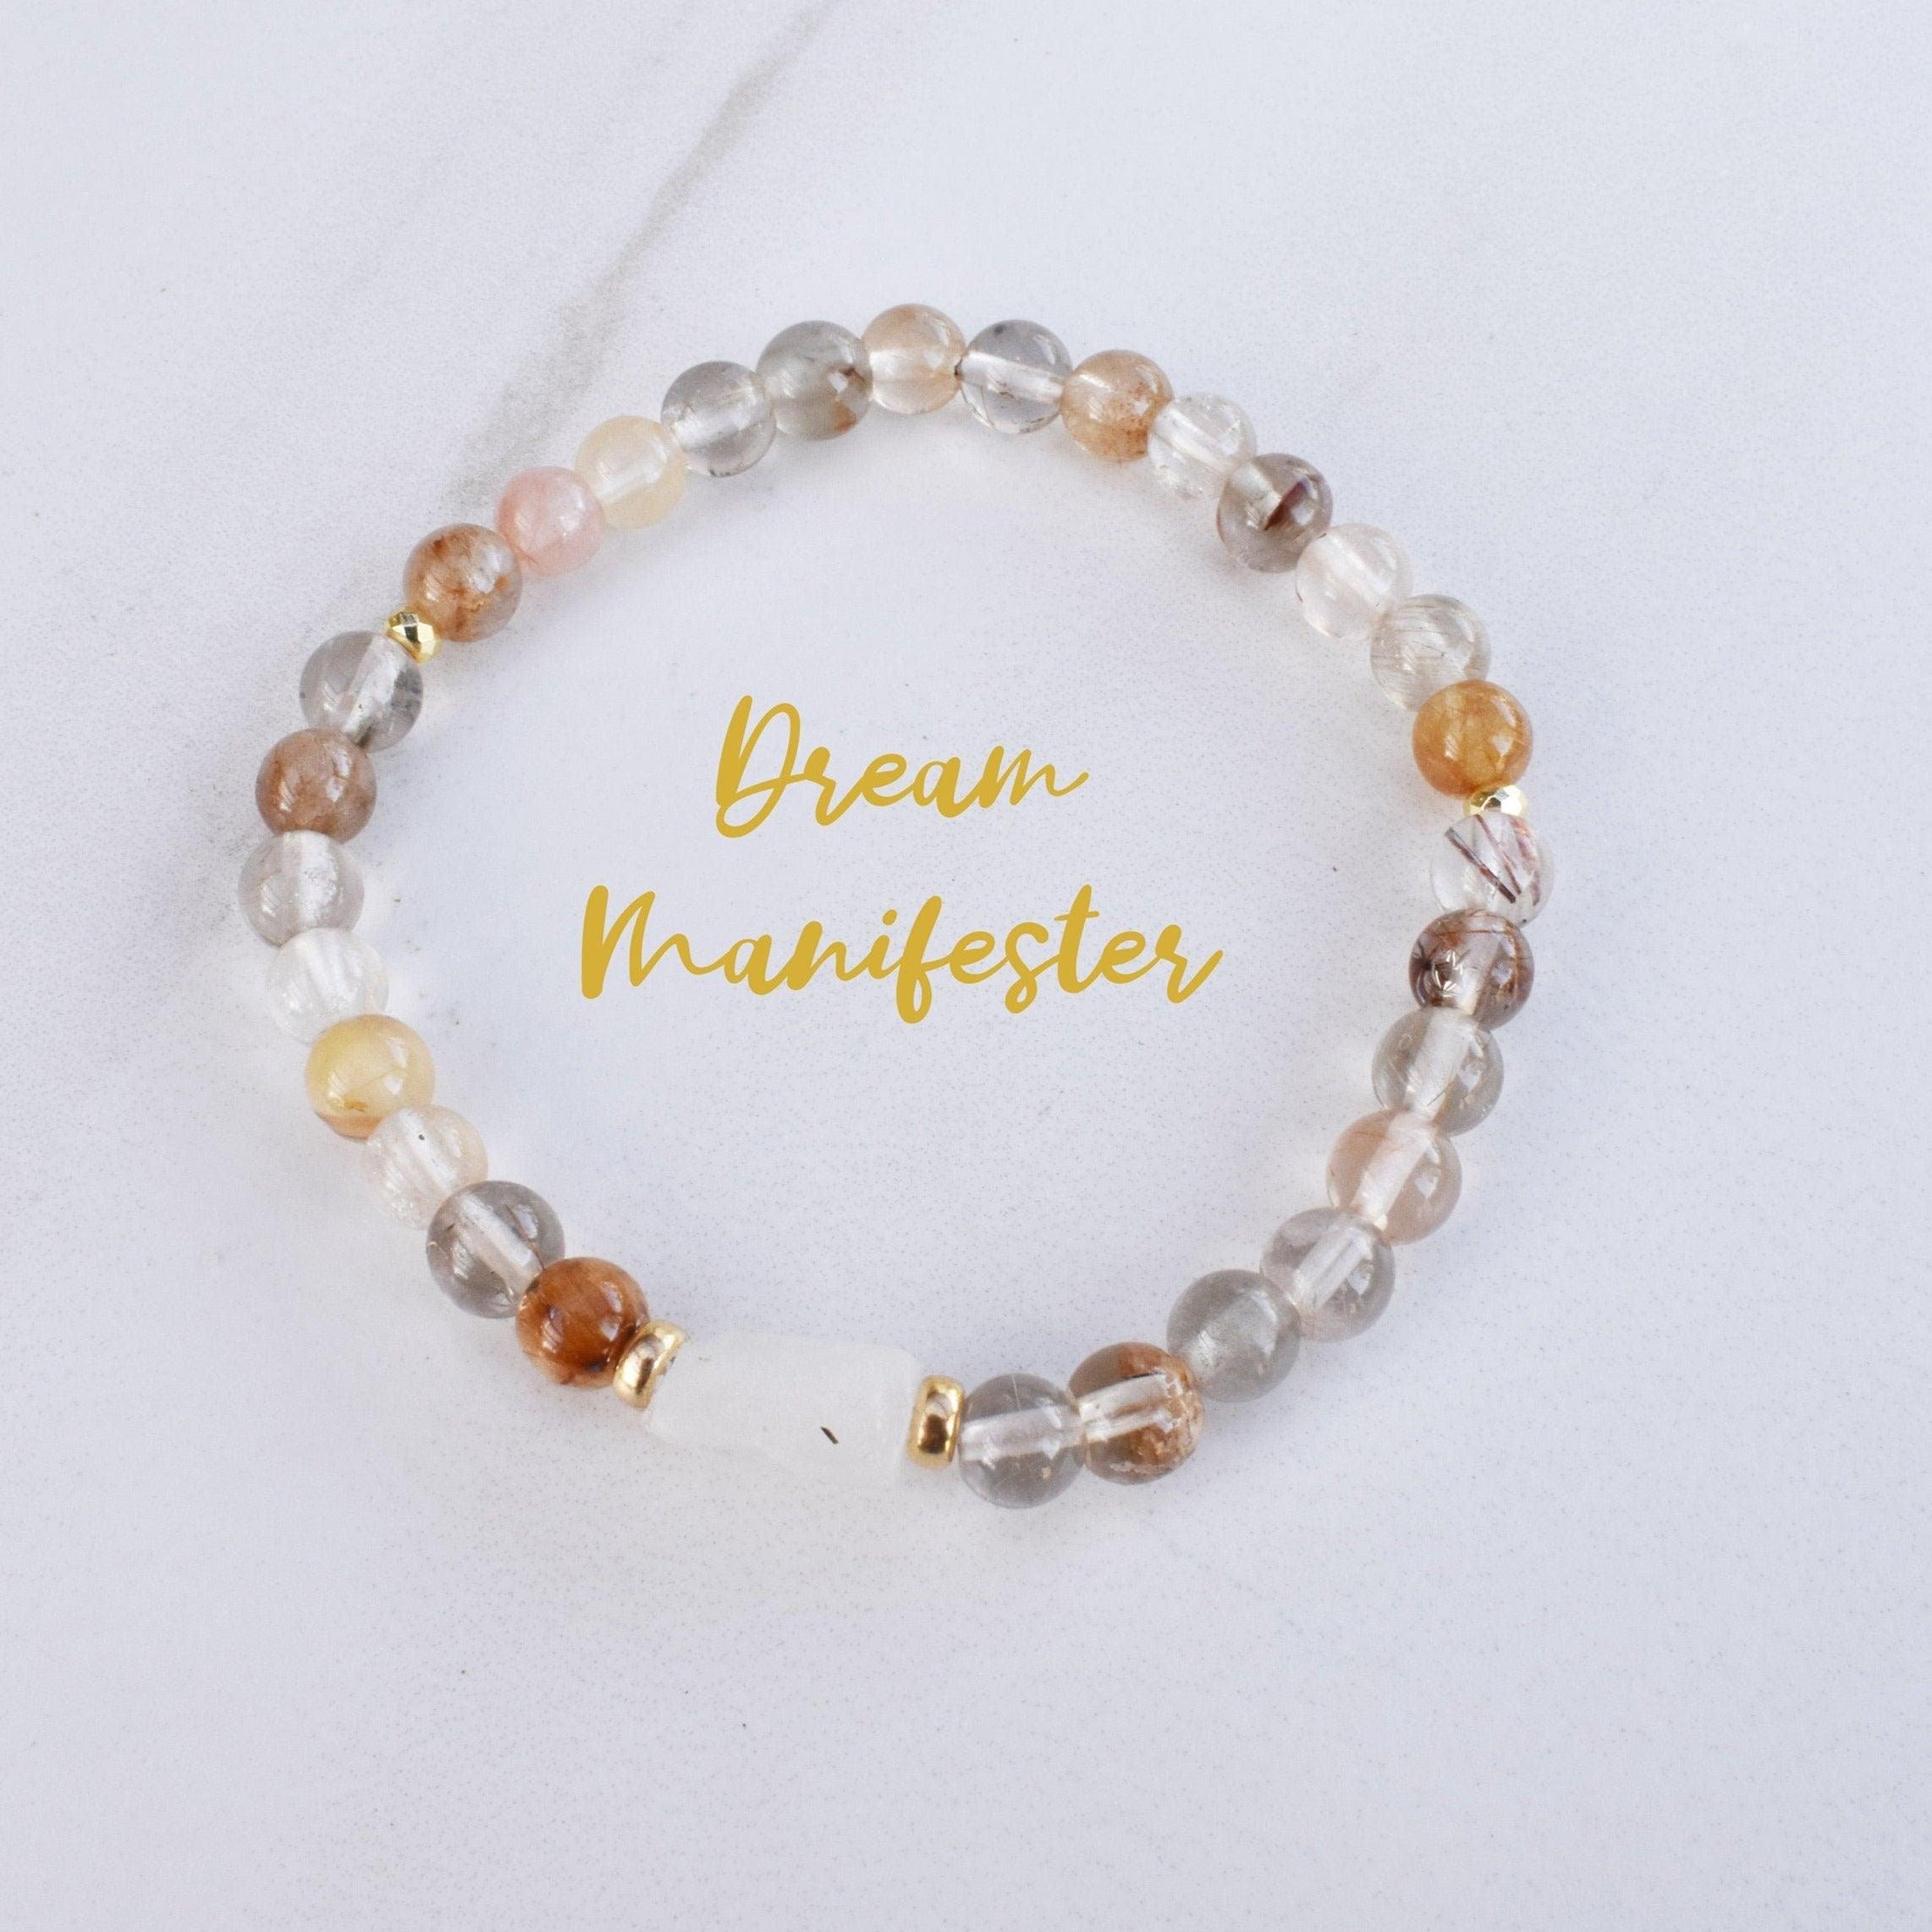 Rutilated Quartz and Moonstone healing Gemstone bracelet to help you manifest your dreams and make them a reality.